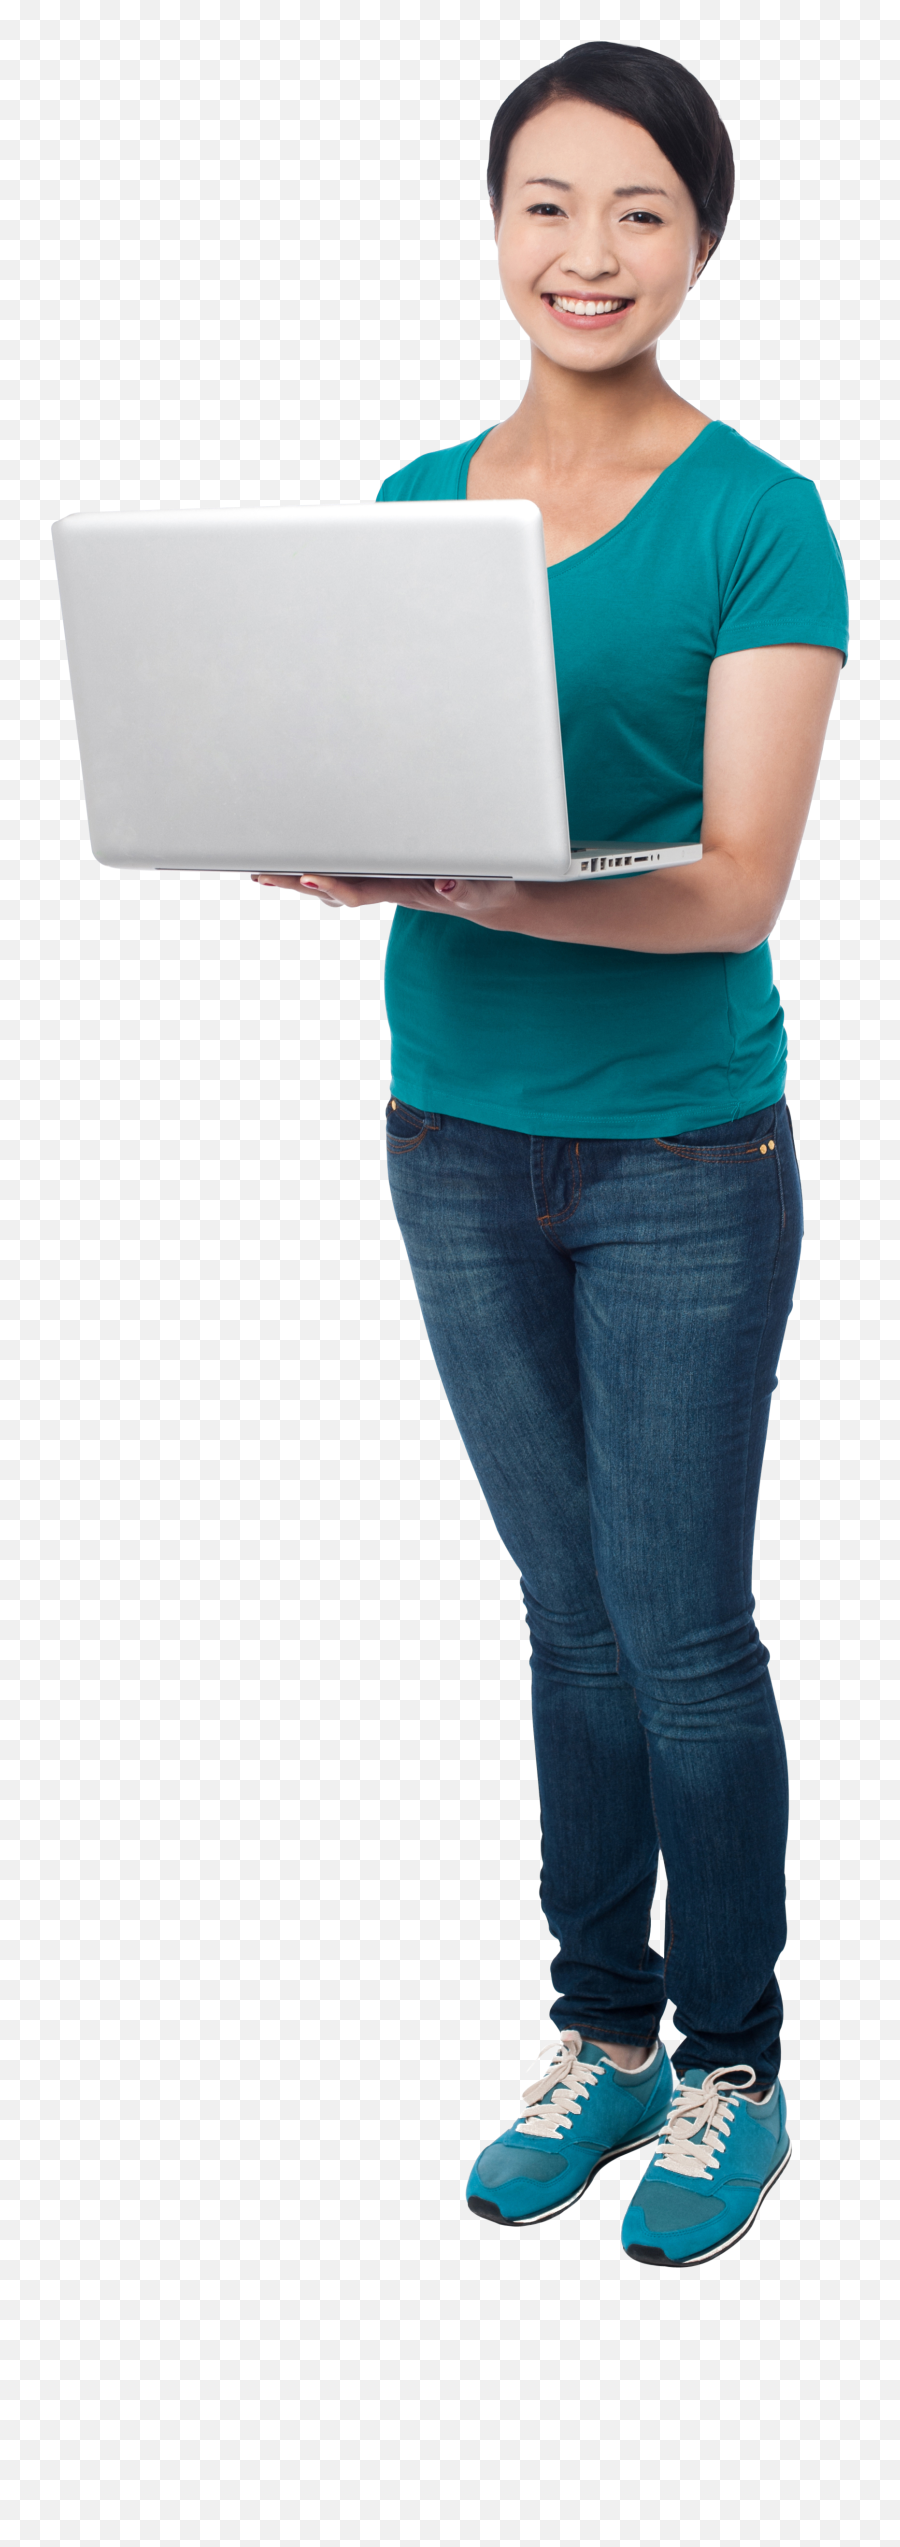 Girl With Laptop Png Image - Girl With Laptop Png Emoji,Laptop Png